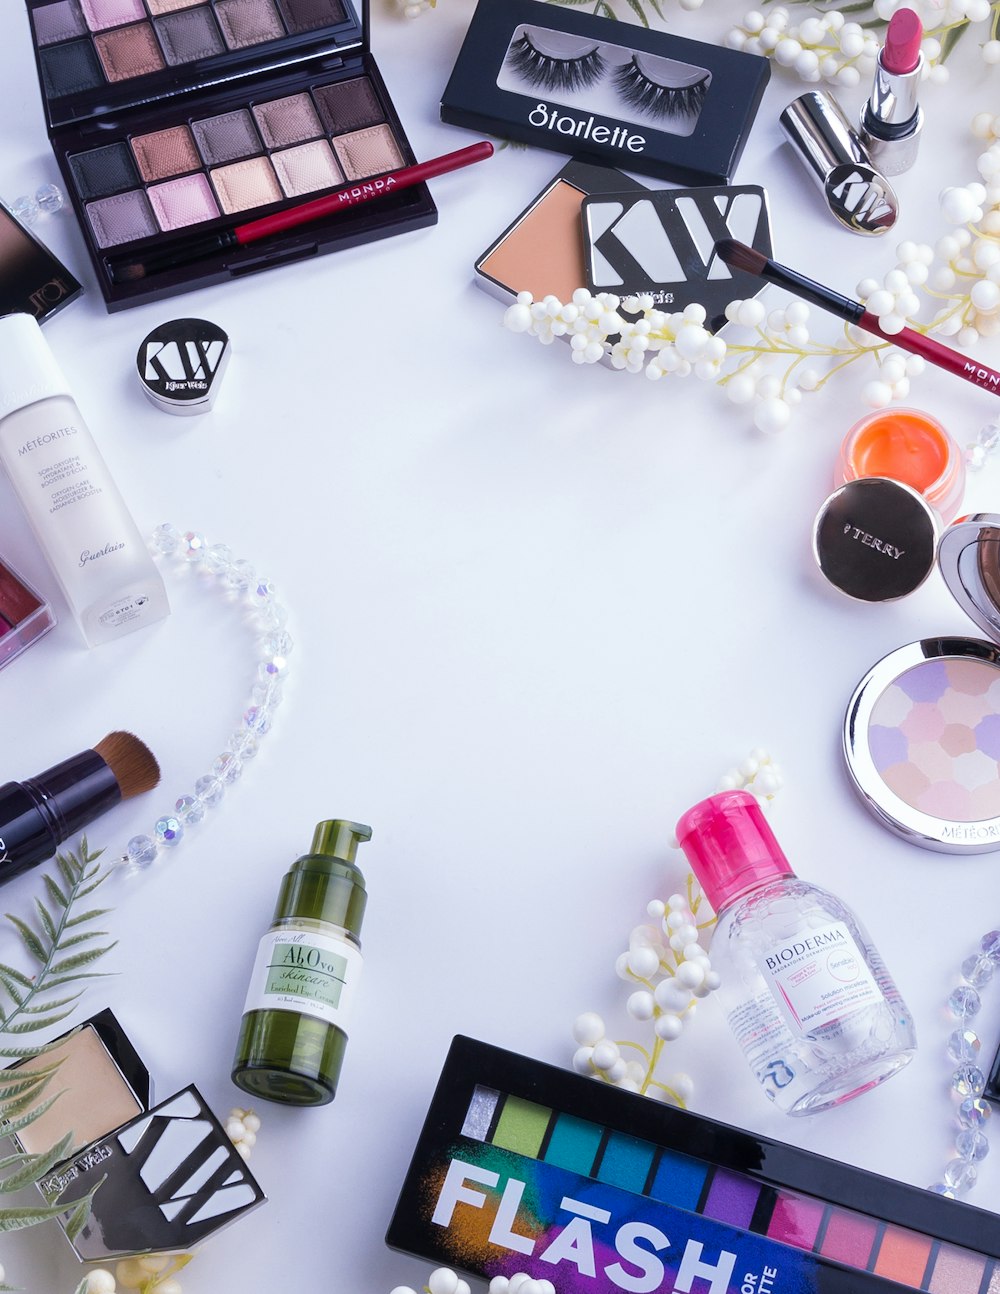 surprising benefits of wearing makeup every day